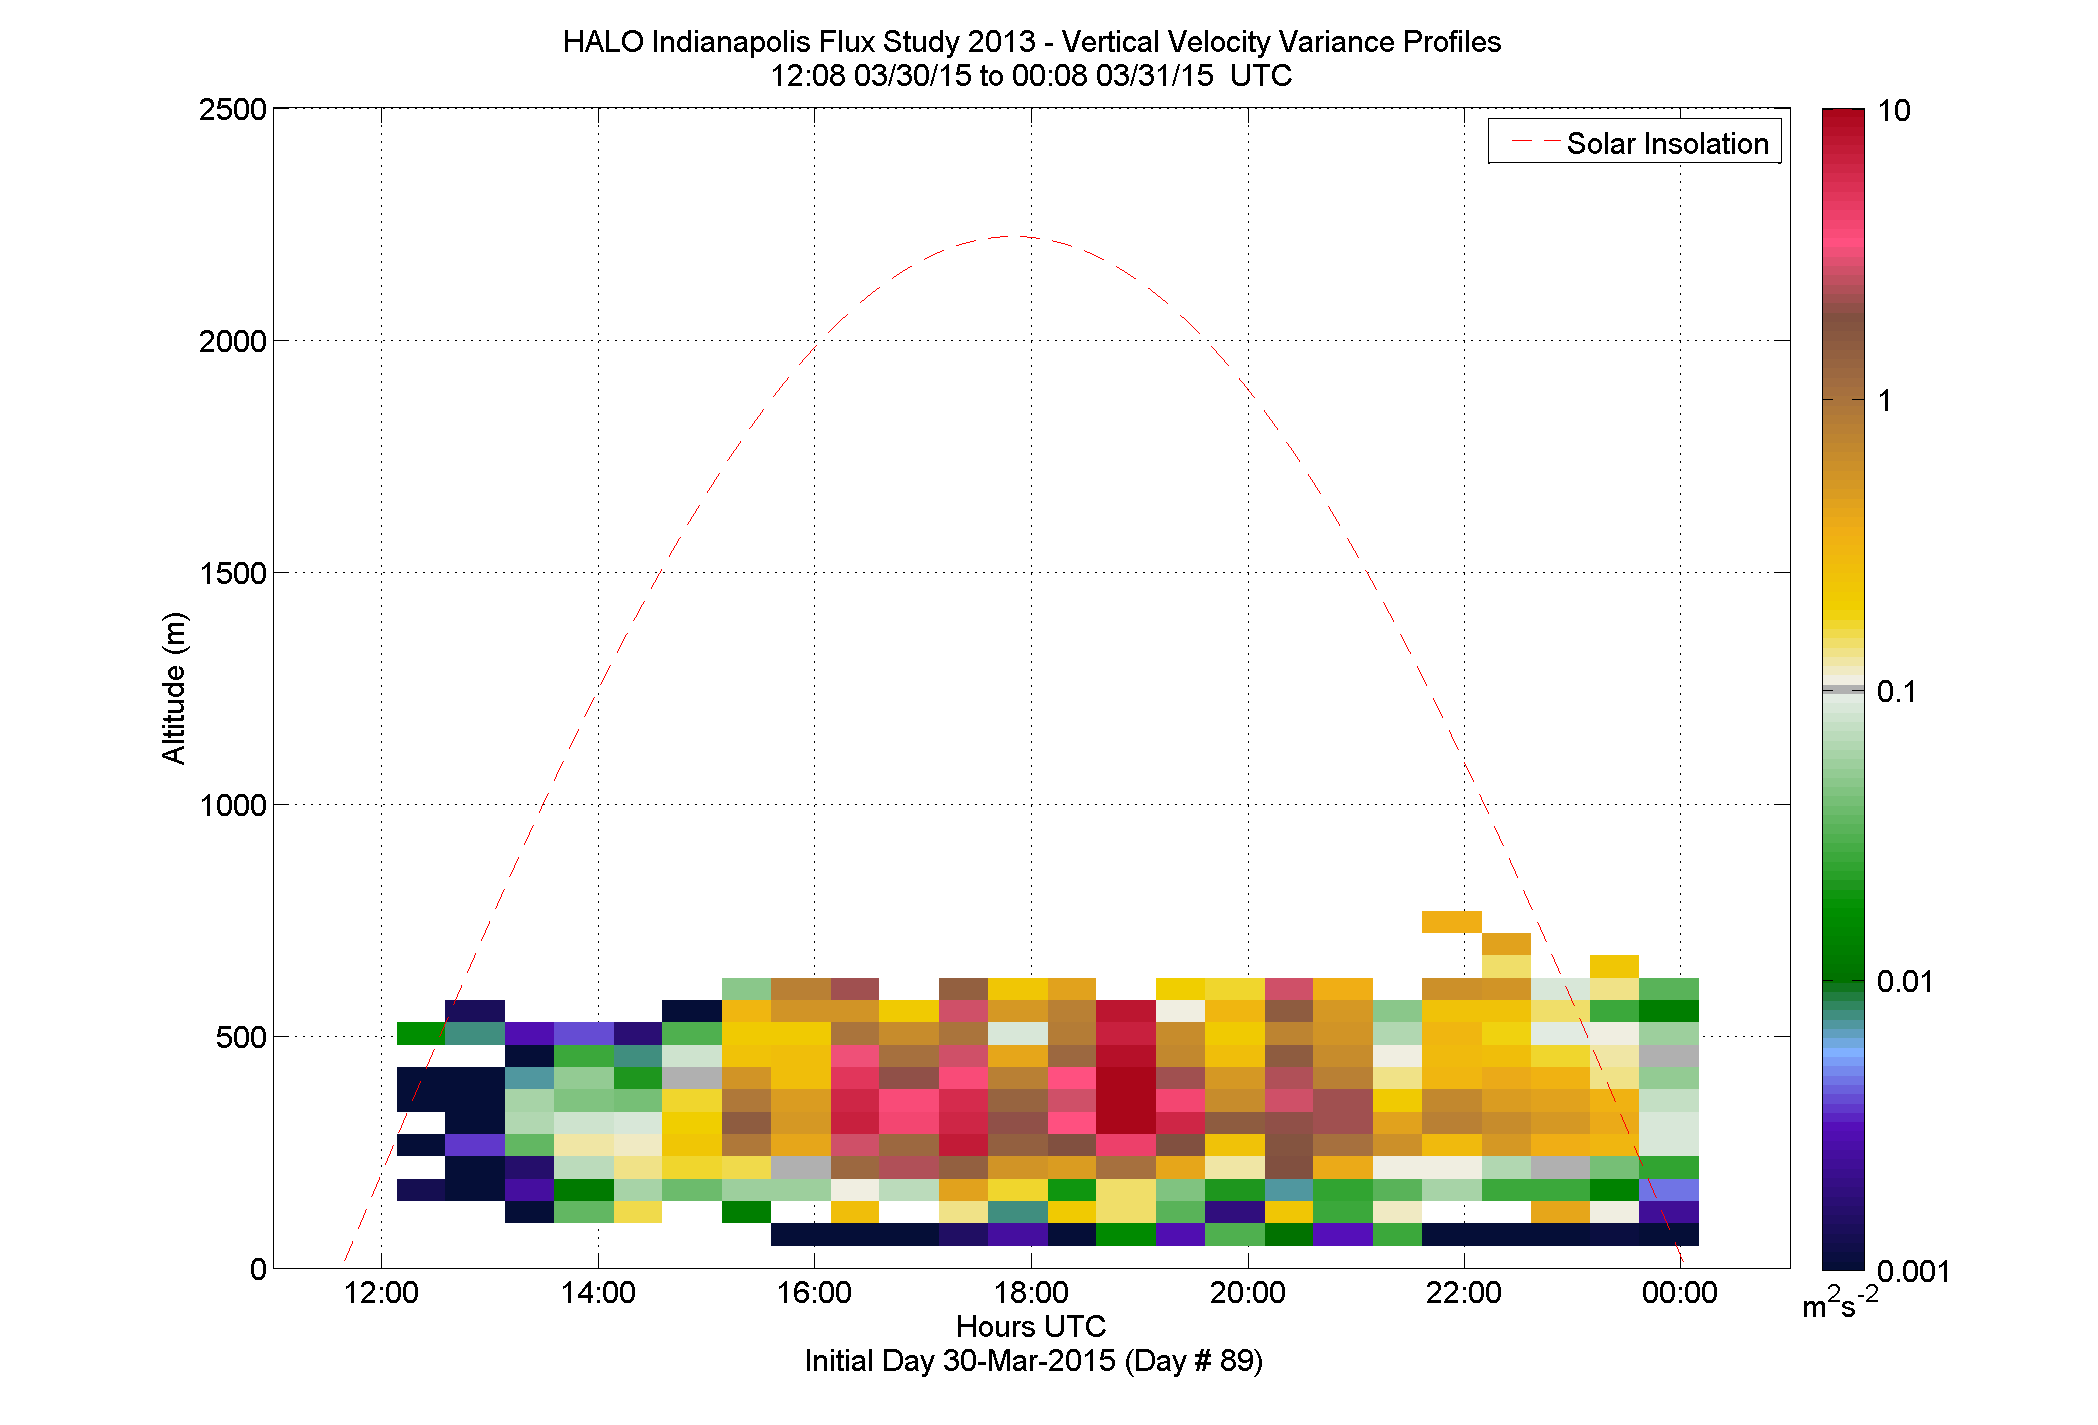 HALO vertical velocity variance profile - March 30 pm